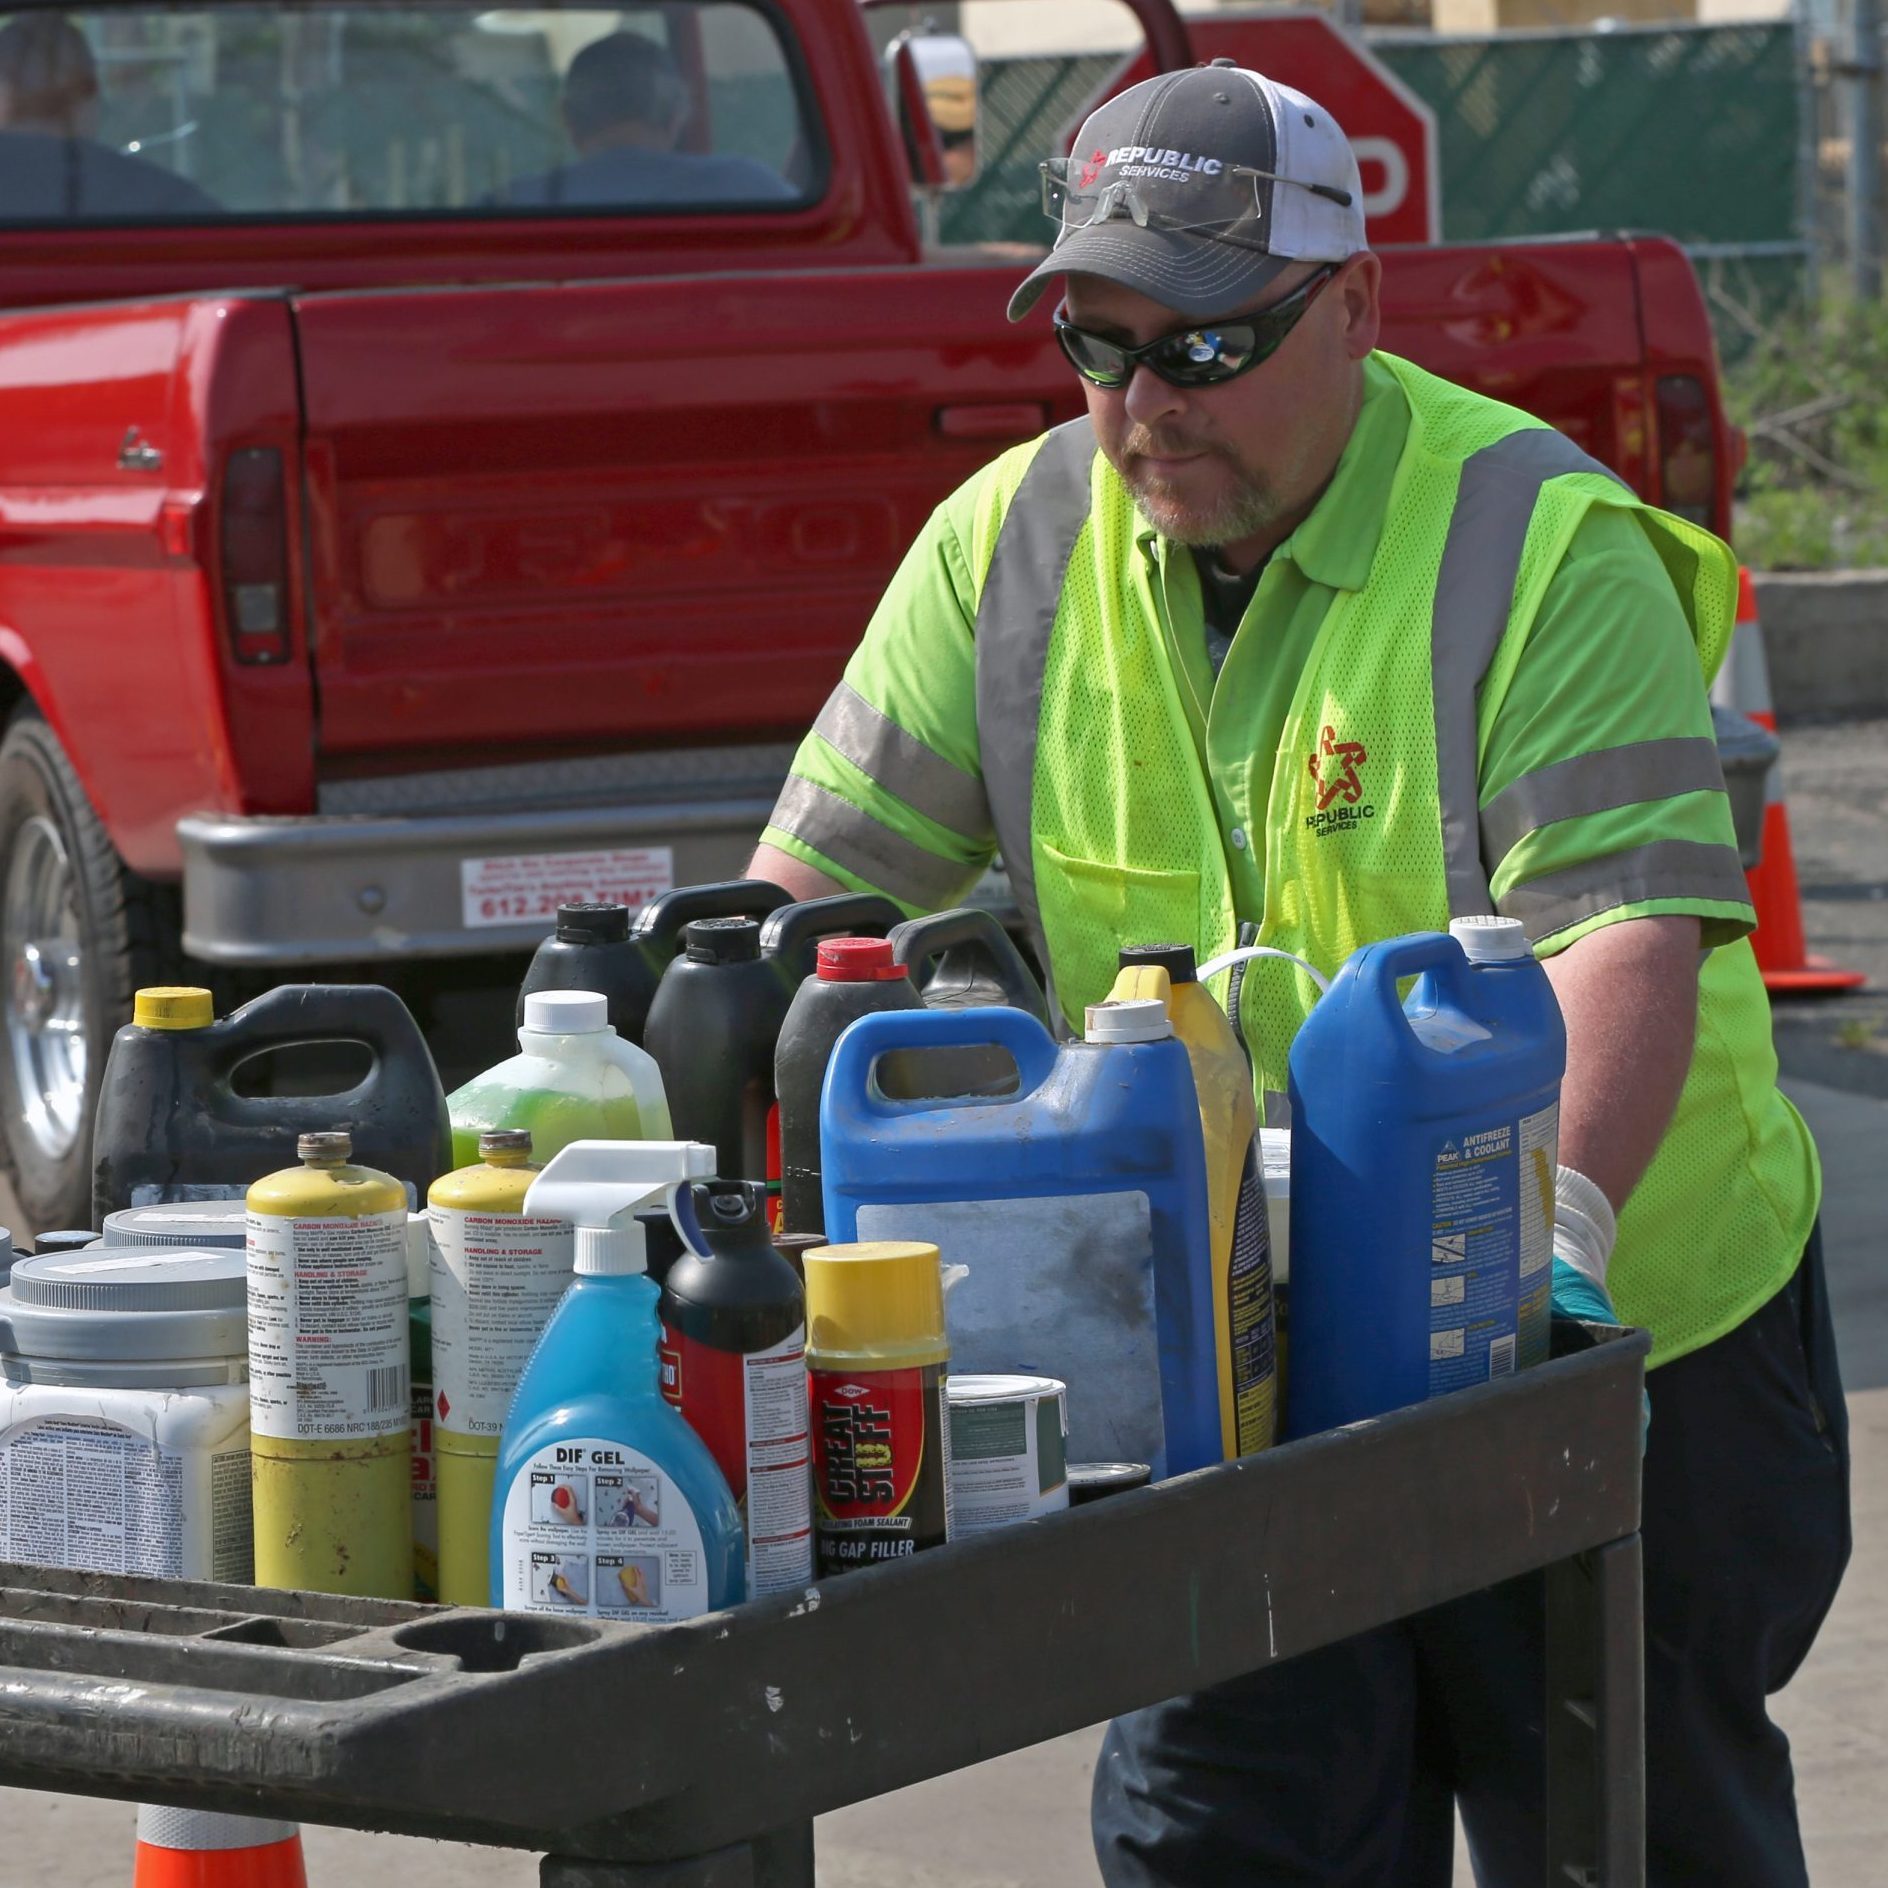 (right) Republic Services event cordinator Mike Alderson and his crew sorted through hazardous household items brought in by county residents during a recycling event held on 5/31/14, at 44th Street in Minneapolis. Hennepin County and its partner cities